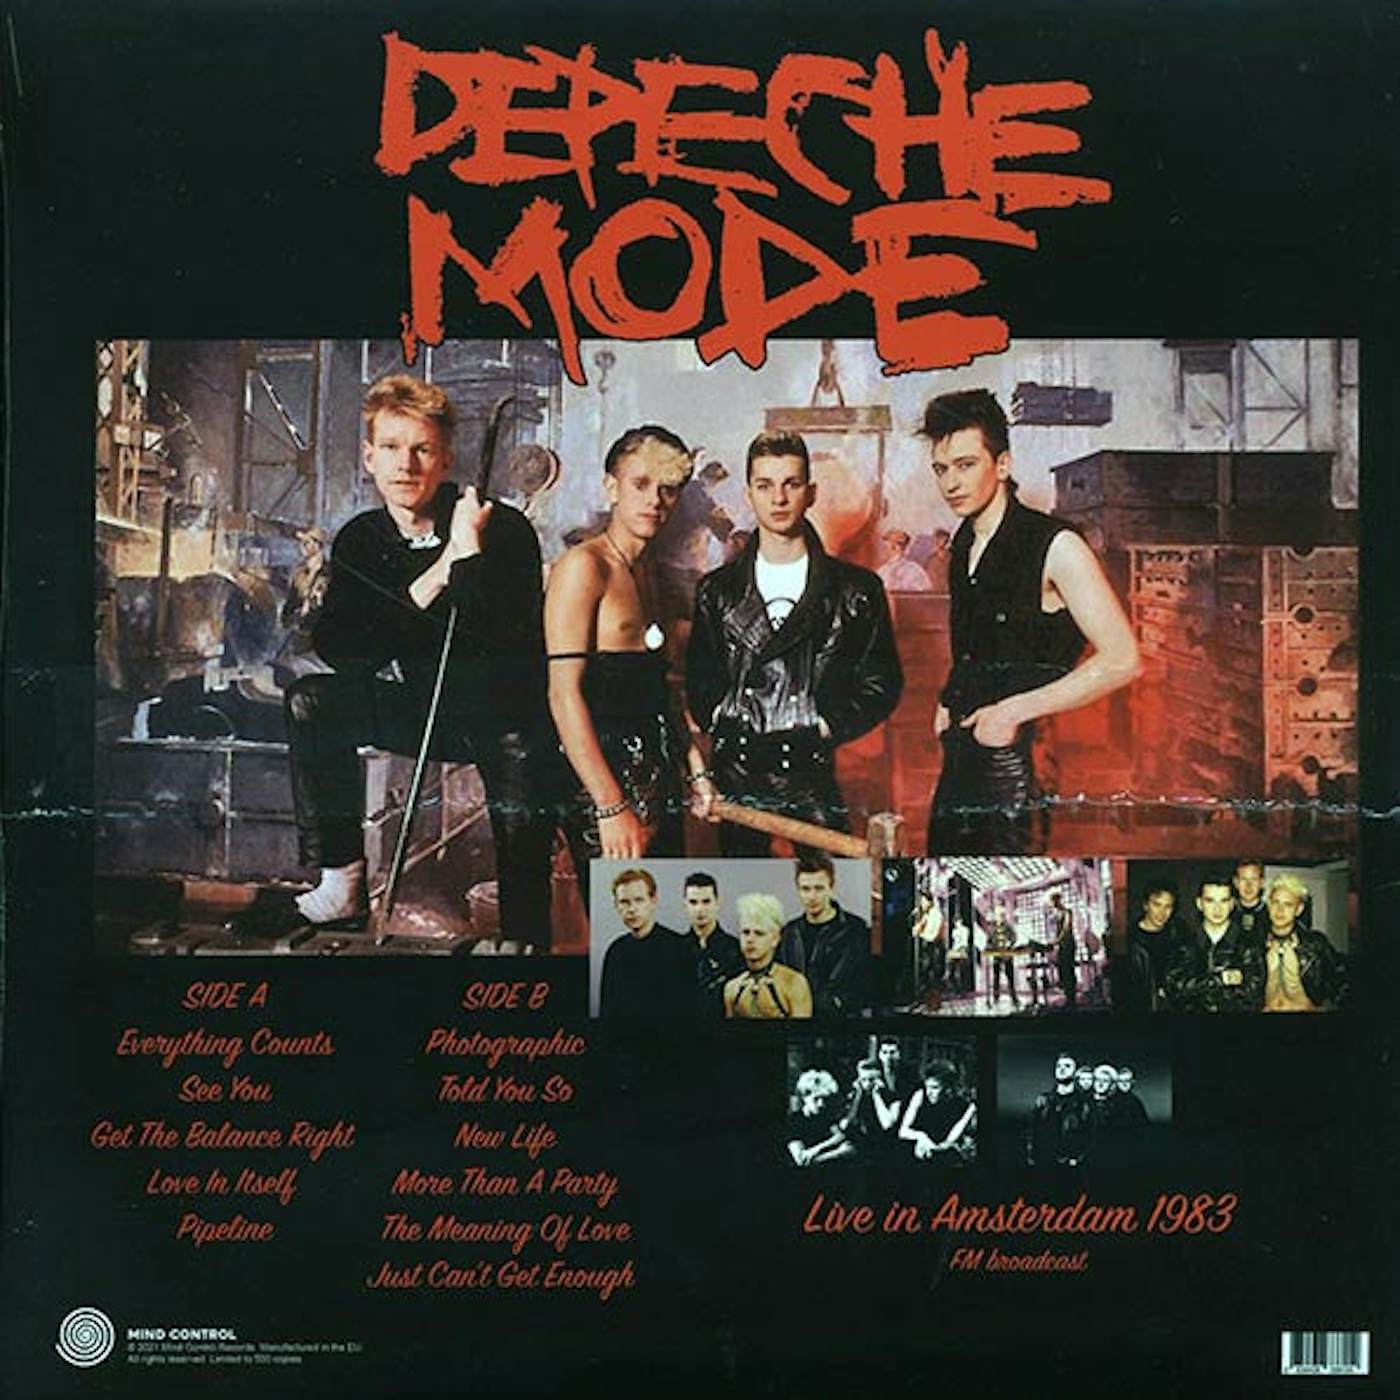 Depeche Mode  LP -  More Than A Party In Amsterdam: Live 1983 FM Broadcast (ltd. 500 copies made) (Vinyl)